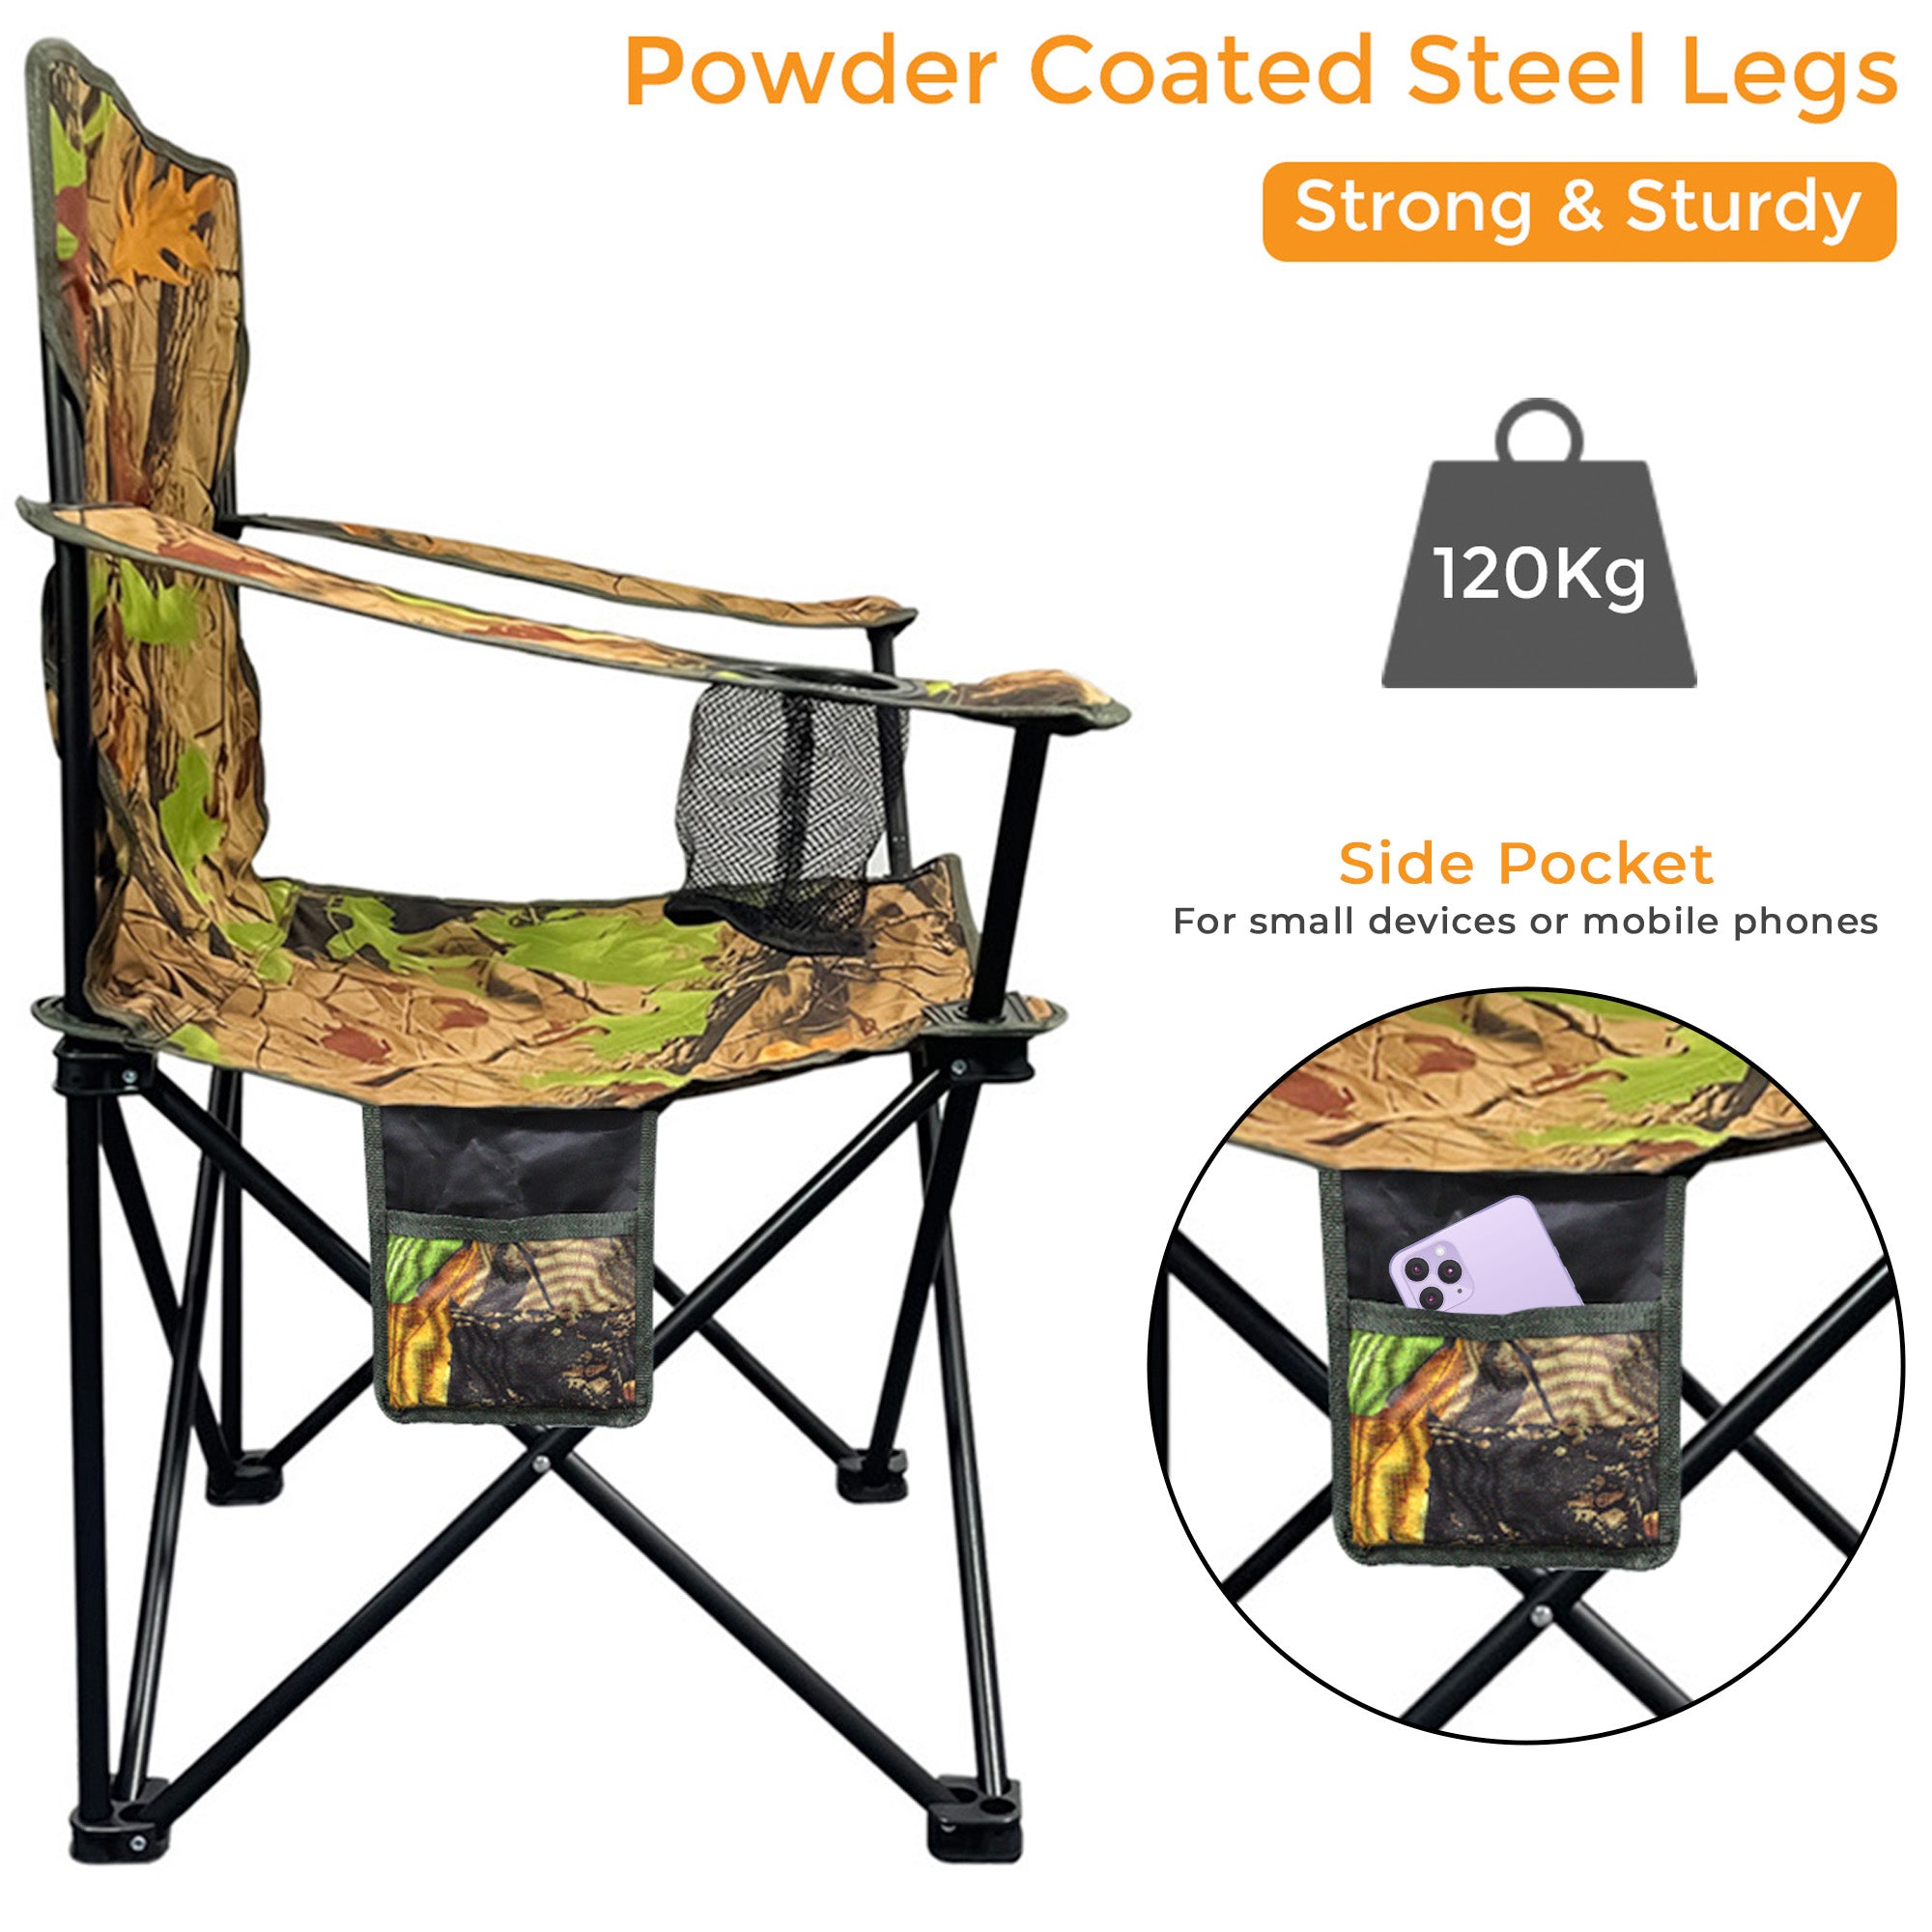 Outdoor Camping Folding Chair for Adults